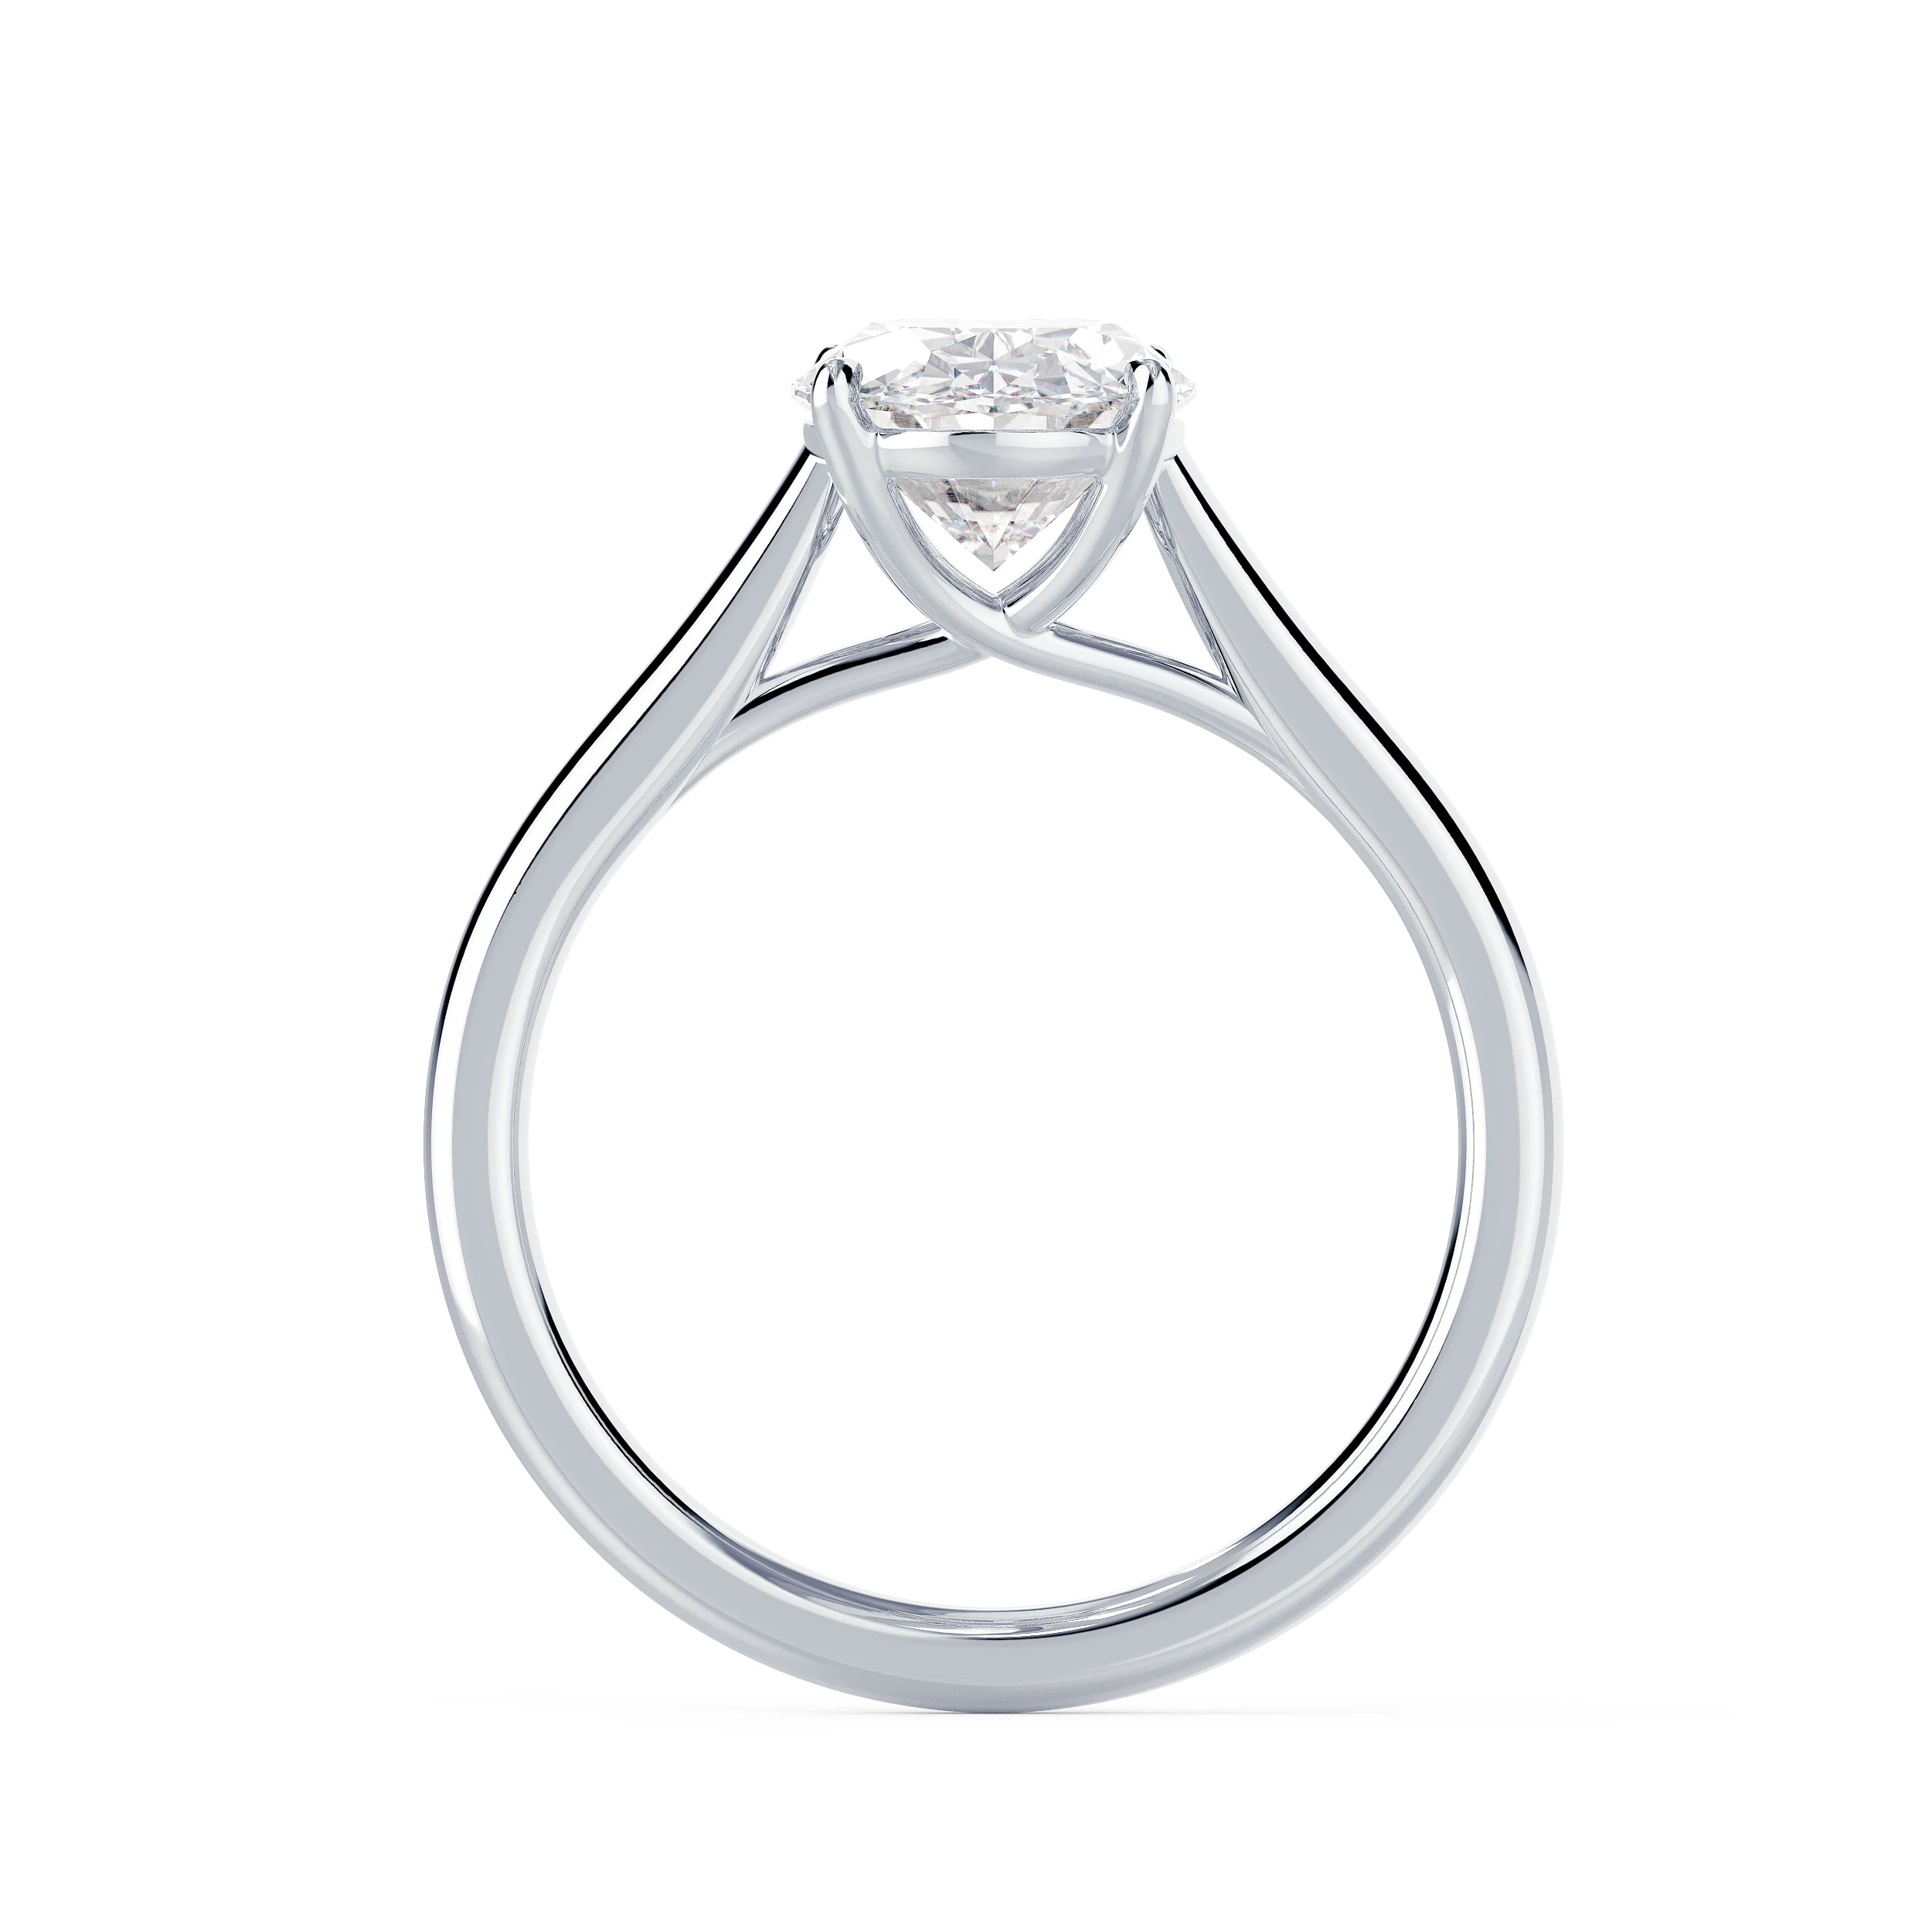 High Quality Diamonds set in White Gold Oval Trellis Solitaire Diamond Engagement Ring (Profile View)